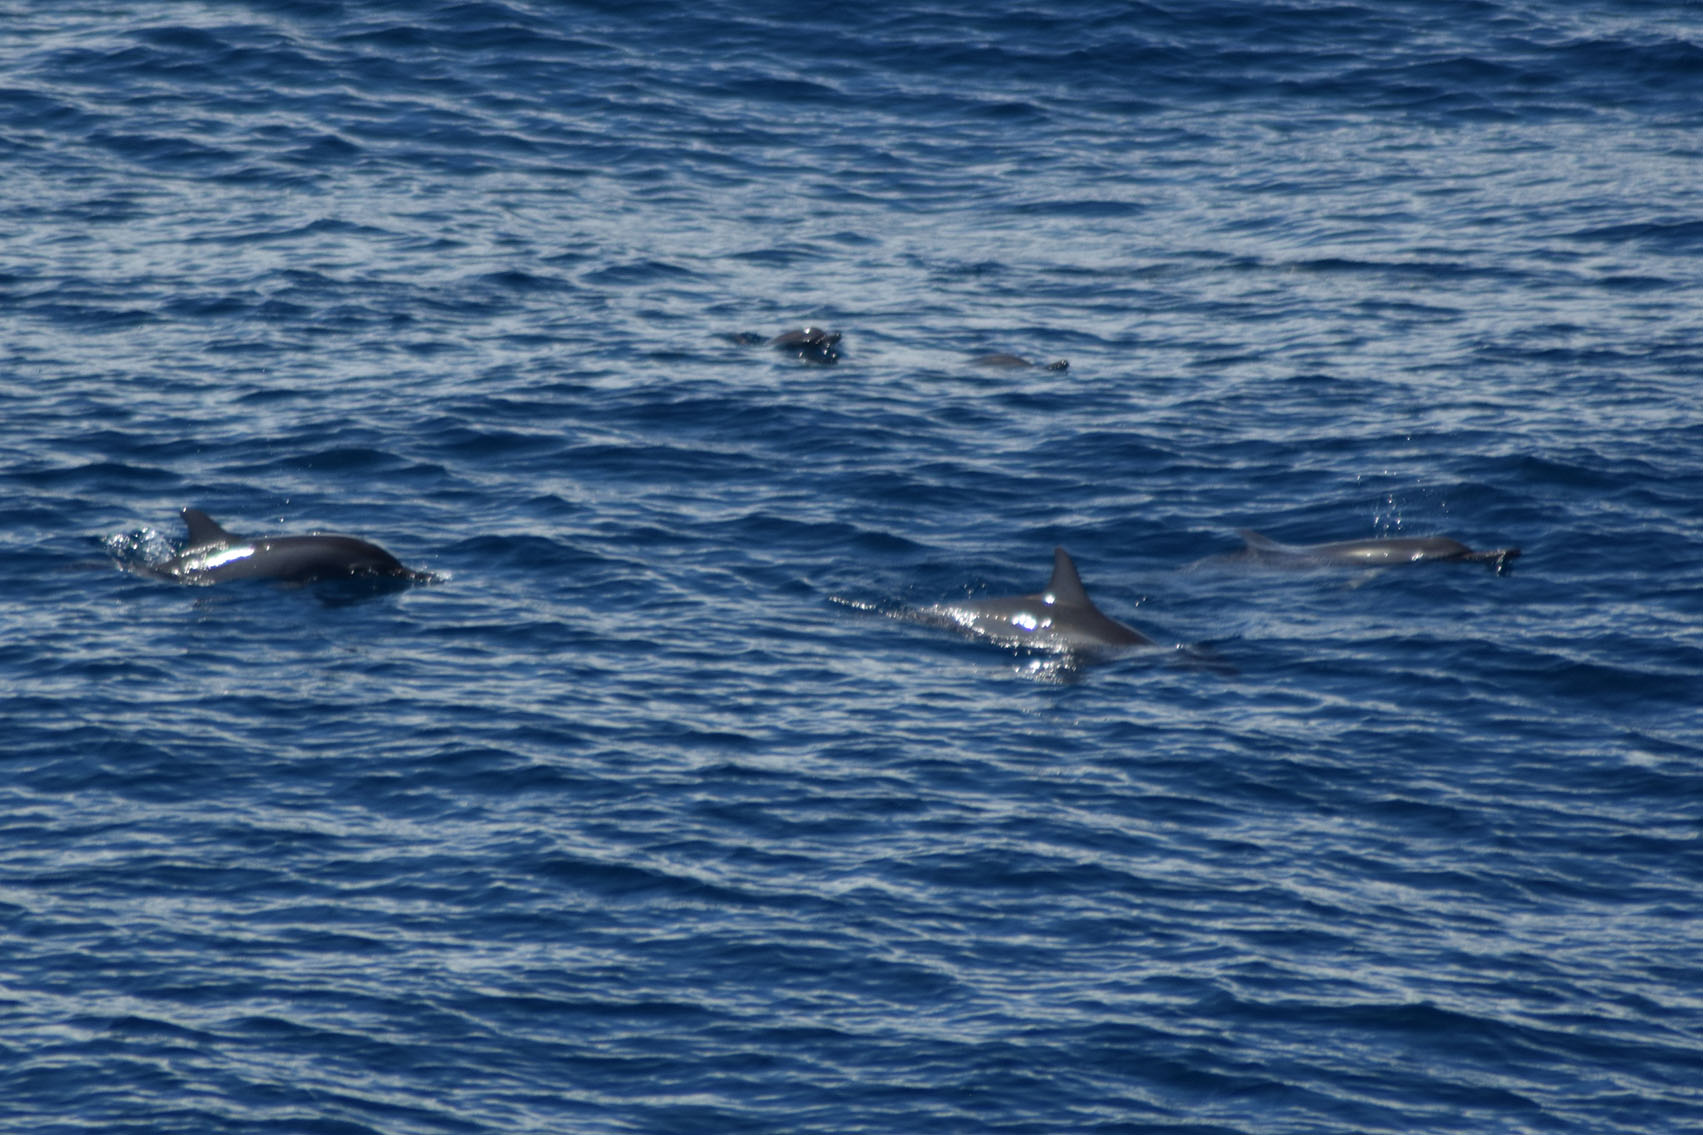 Dolphins were some of the cetaceans observed early in the expedition, when R/V Marion Dufresne was still close to shore (Source: Erwin Guillon)